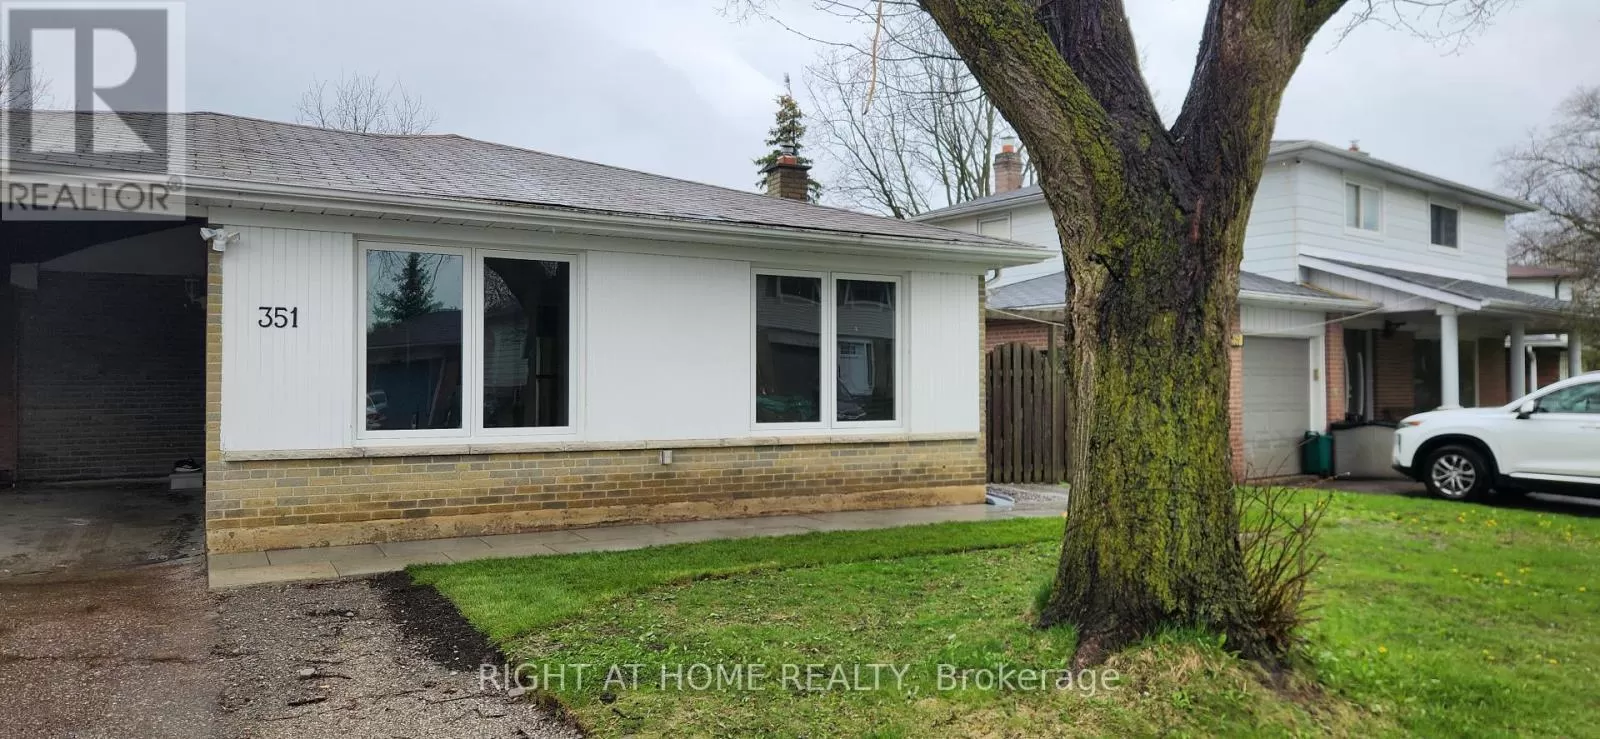 House for rent: 351 Glenrose Road, Newmarket, Ontario L3Y 4M4